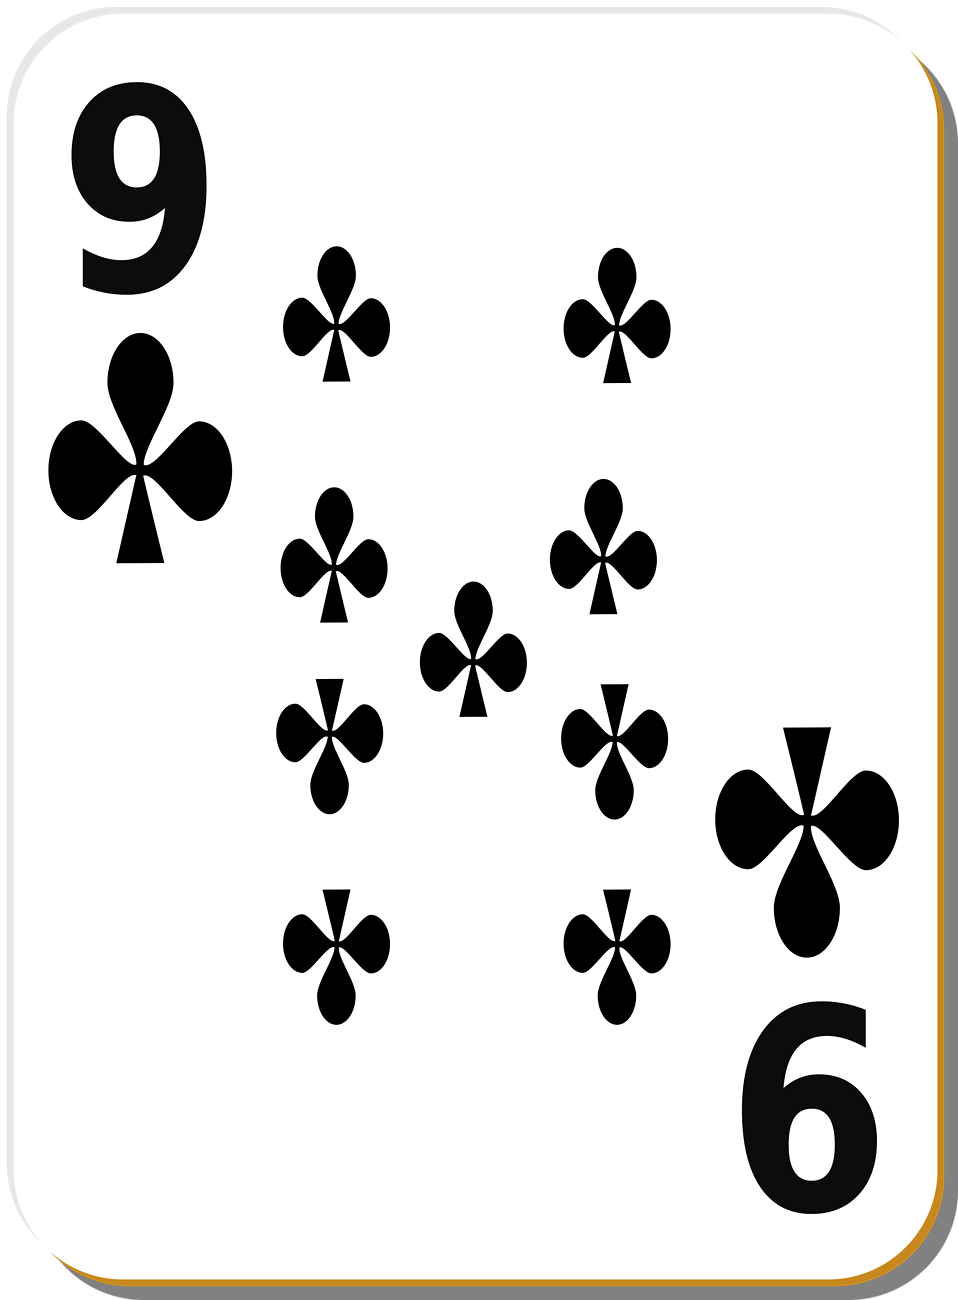 Playing Card | Free Stock Photo | Illustration of a Nine of Clubs ...